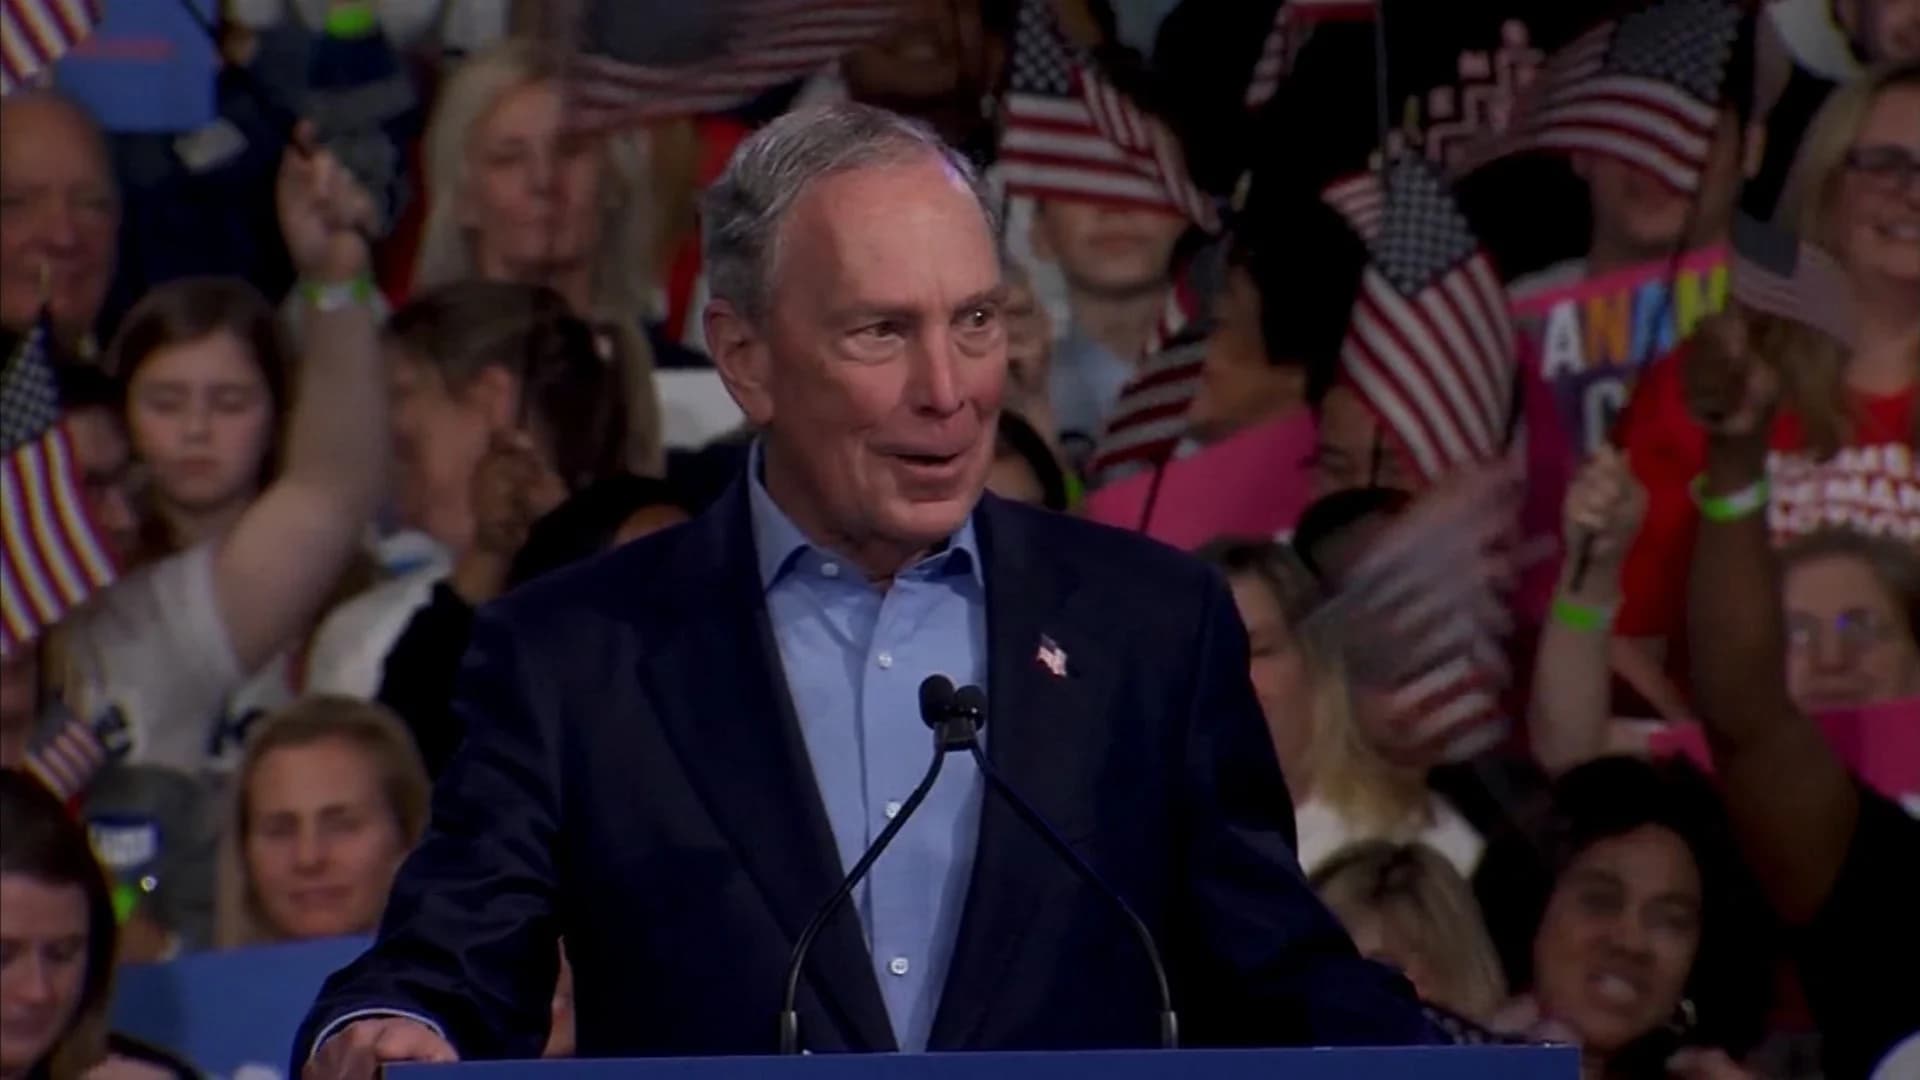 Bloomberg drops out of presidential race, endorses Biden